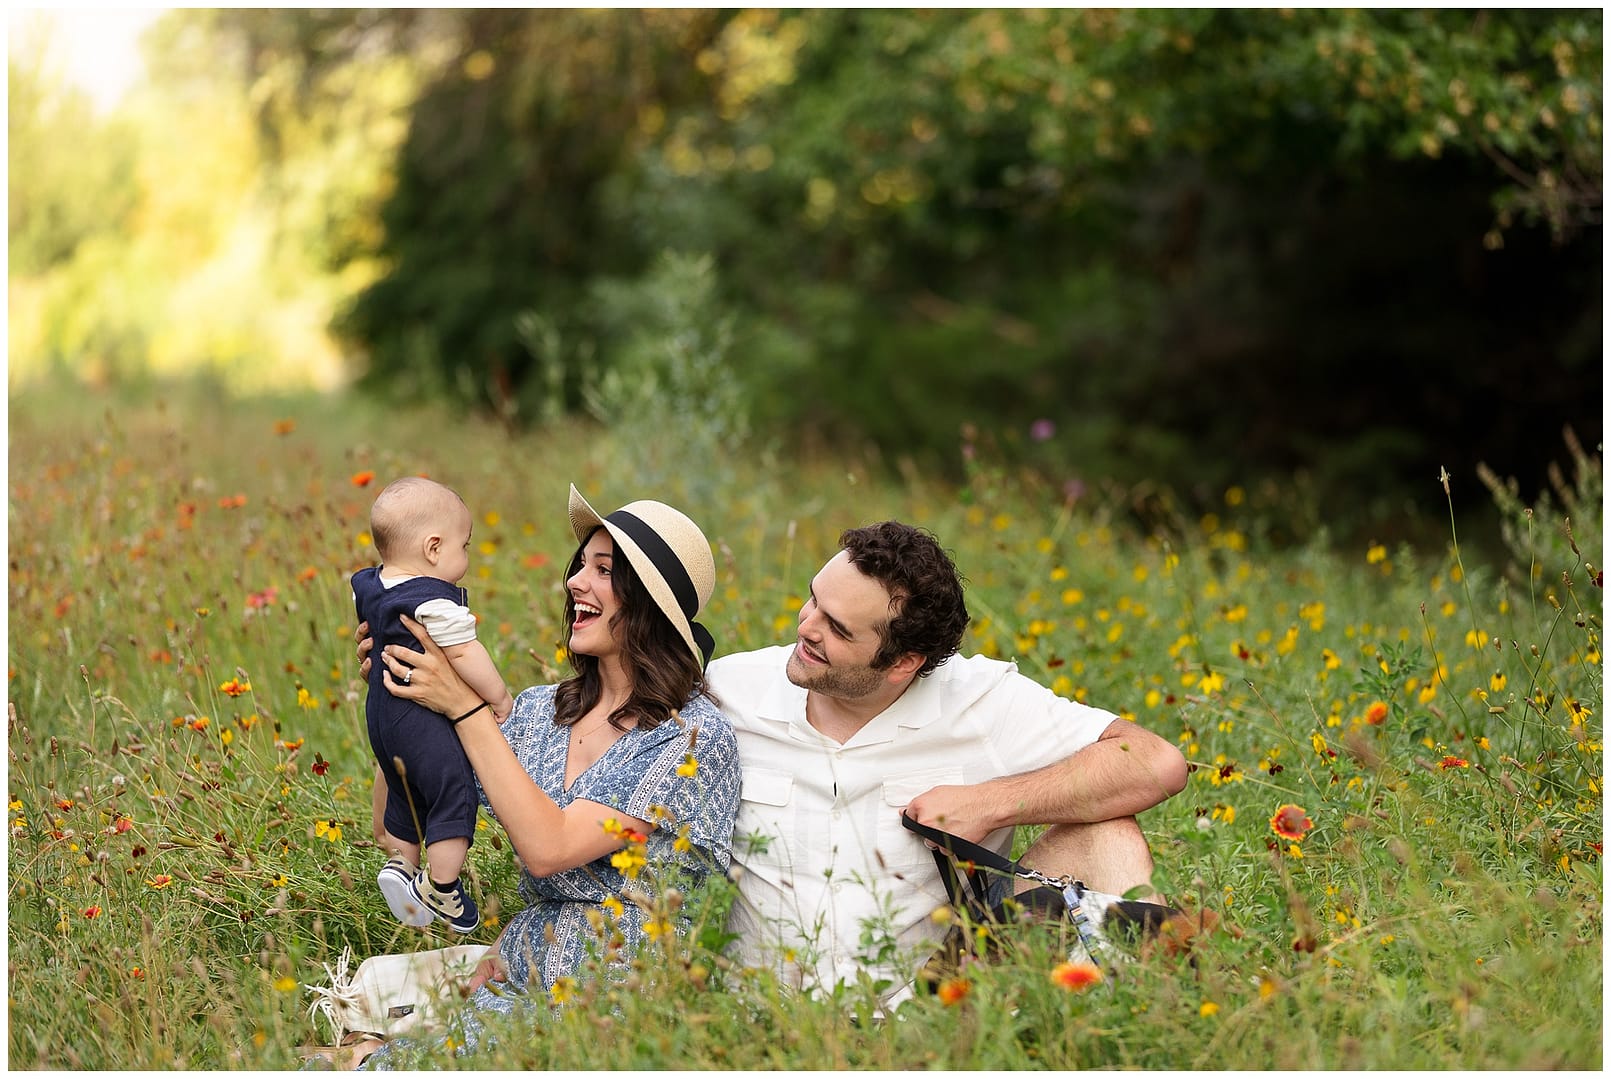 Parents smile at baby during natural family photos in a wildflower field. Photo by Tiffany Hix Photography.